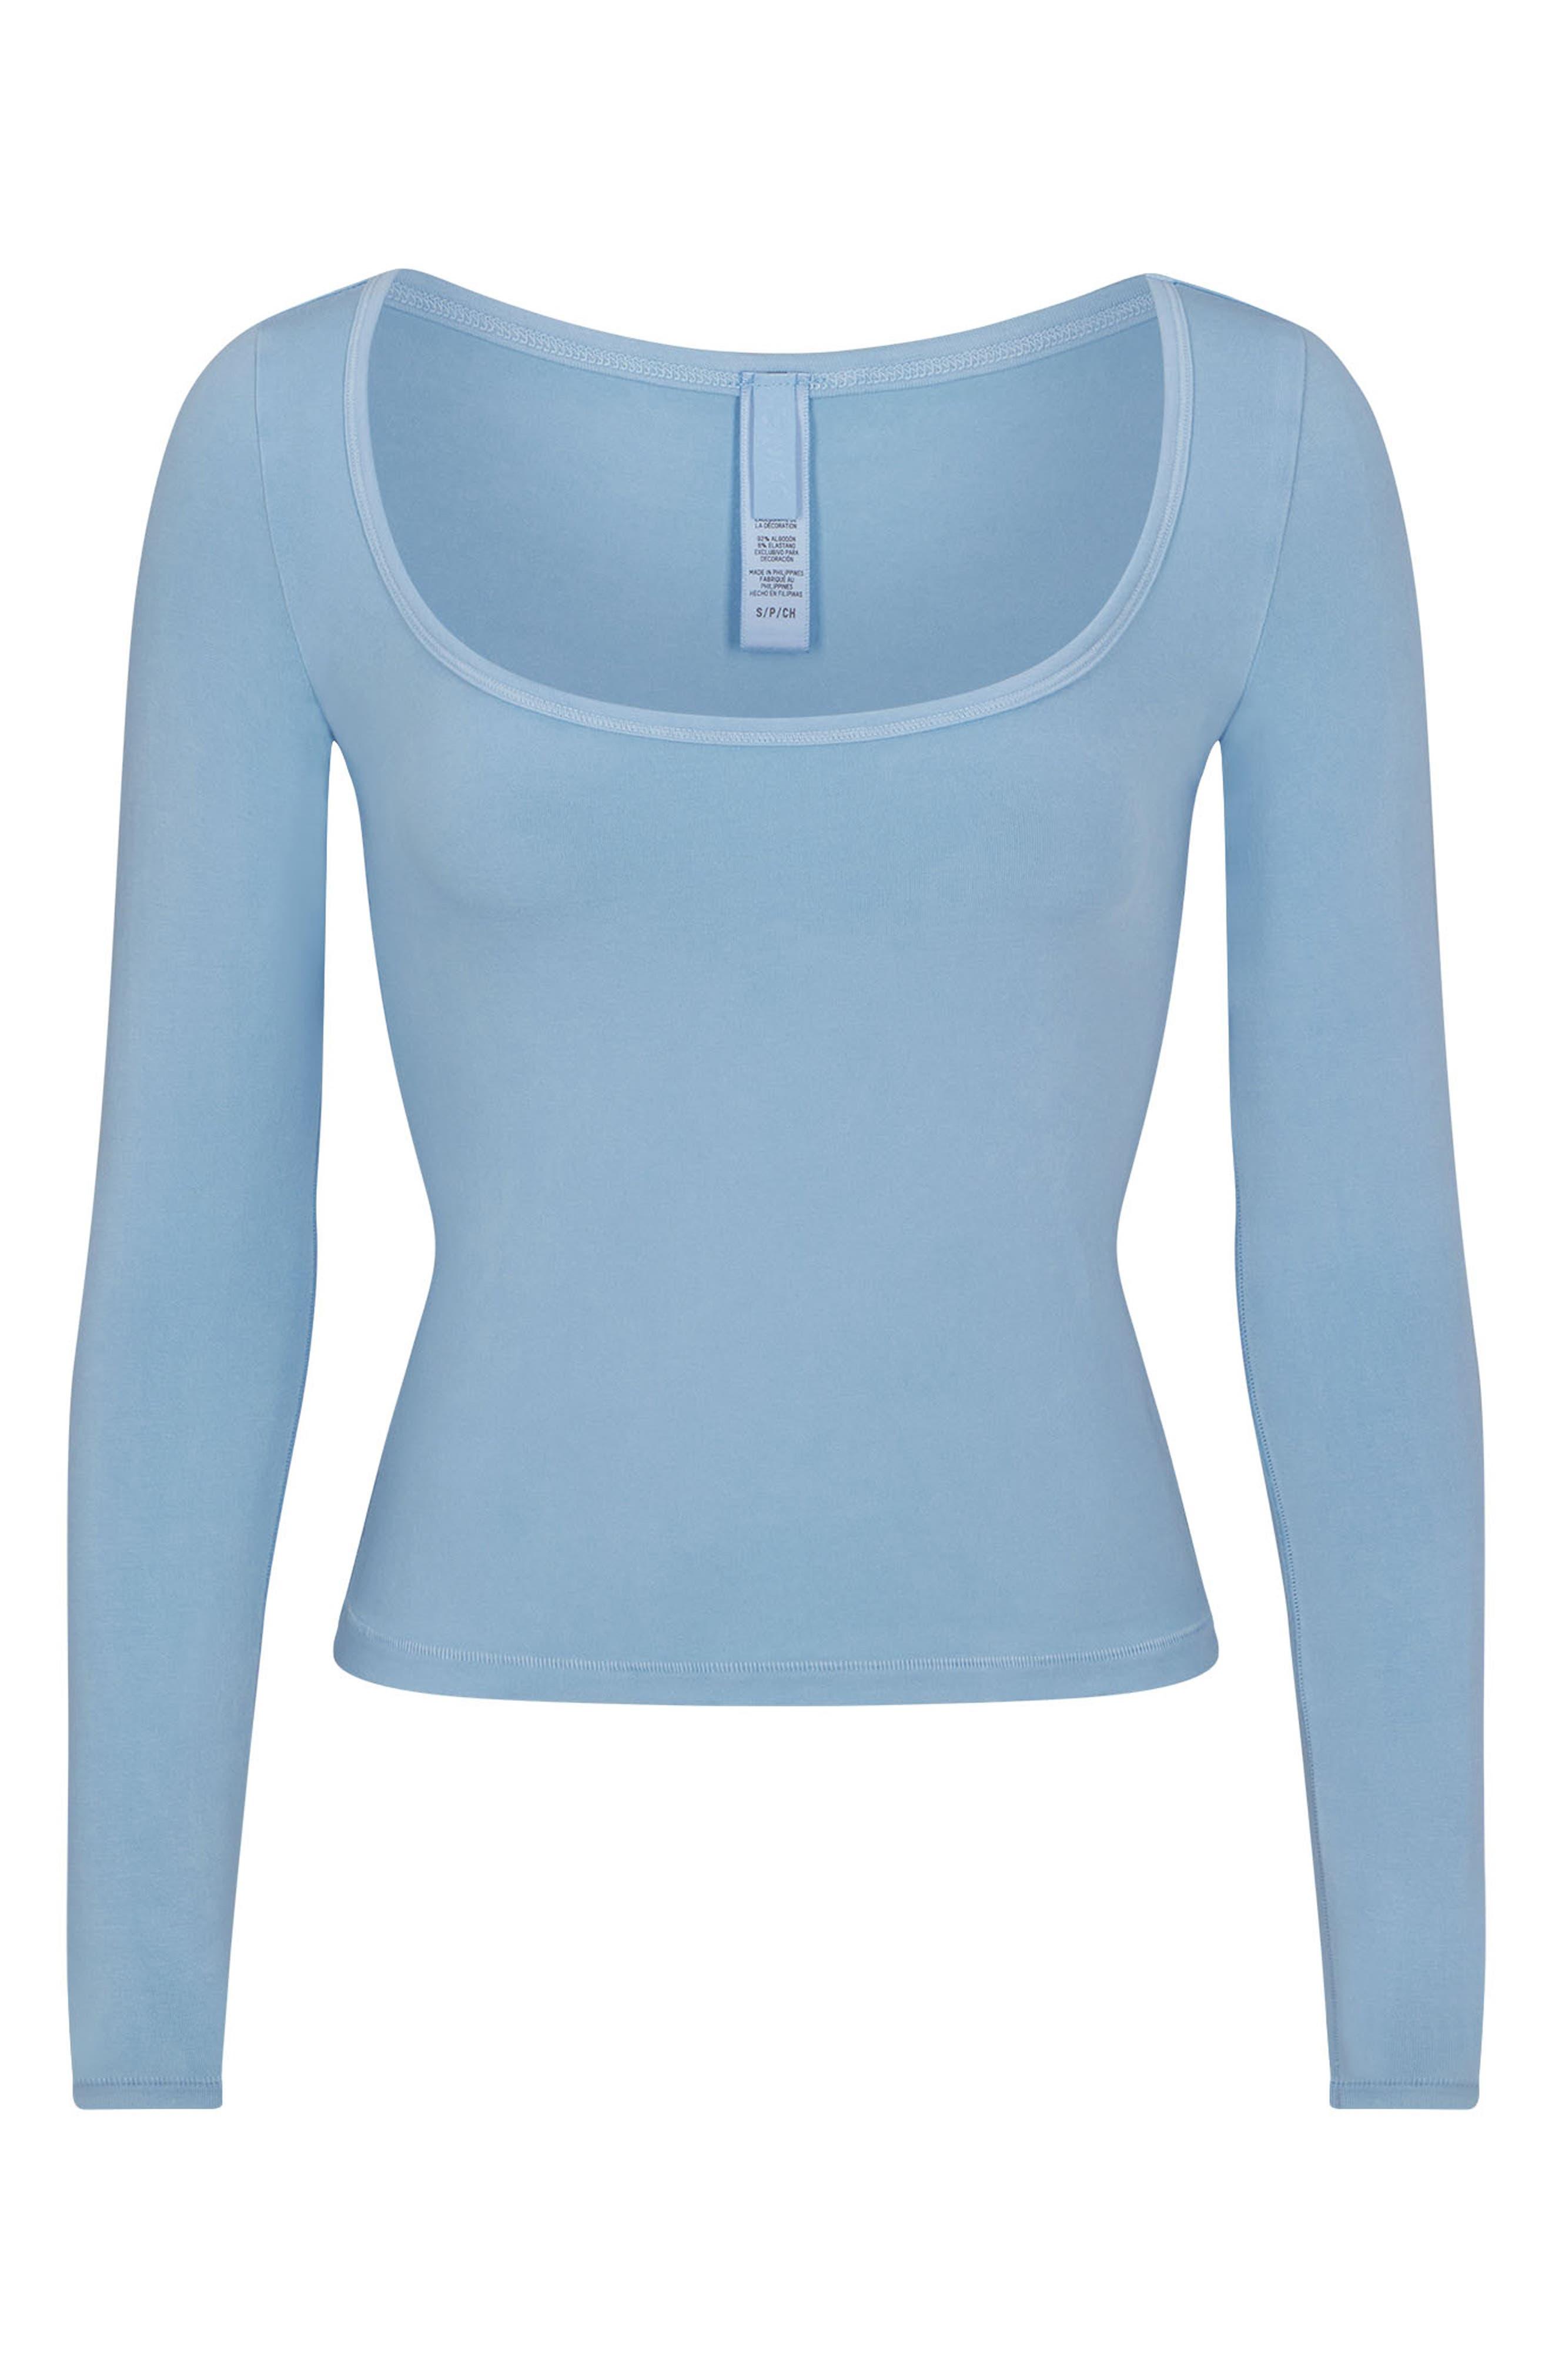 Skims Square Neck Long Sleeve T-shirt in Blue